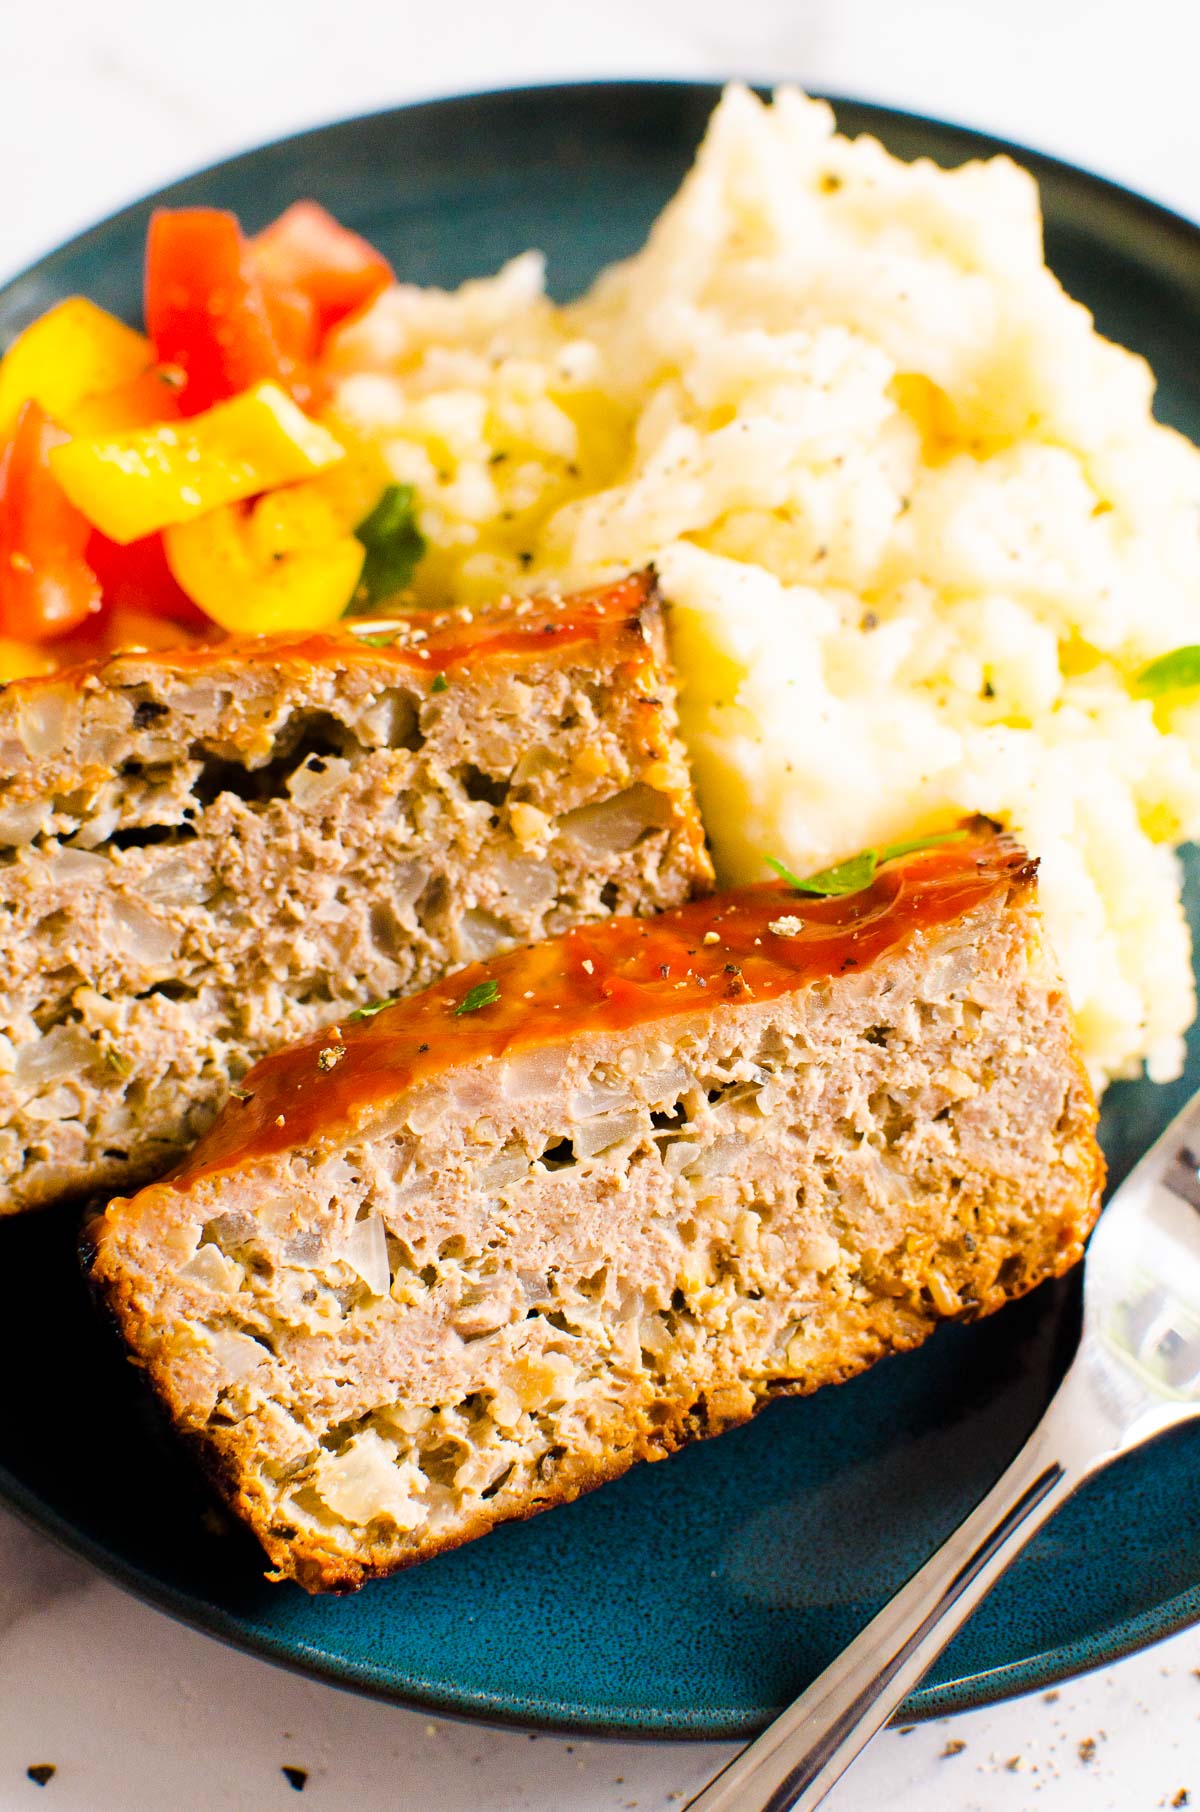 turkey meatloaf on plate for serving with mashed potatoes and bell peppers